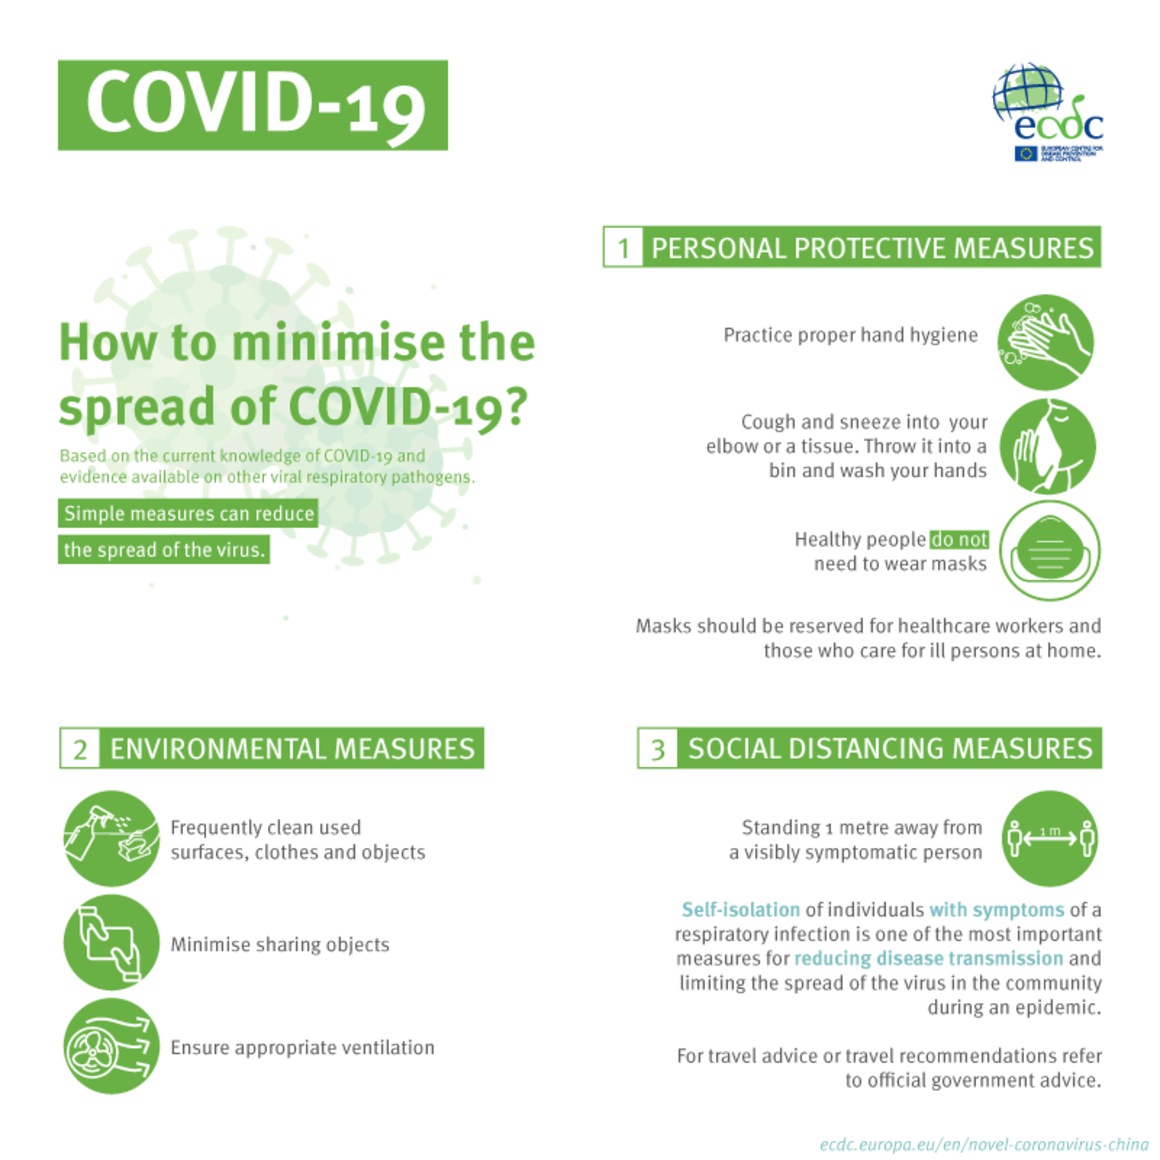 COVID-19 - How to minimise the spread?